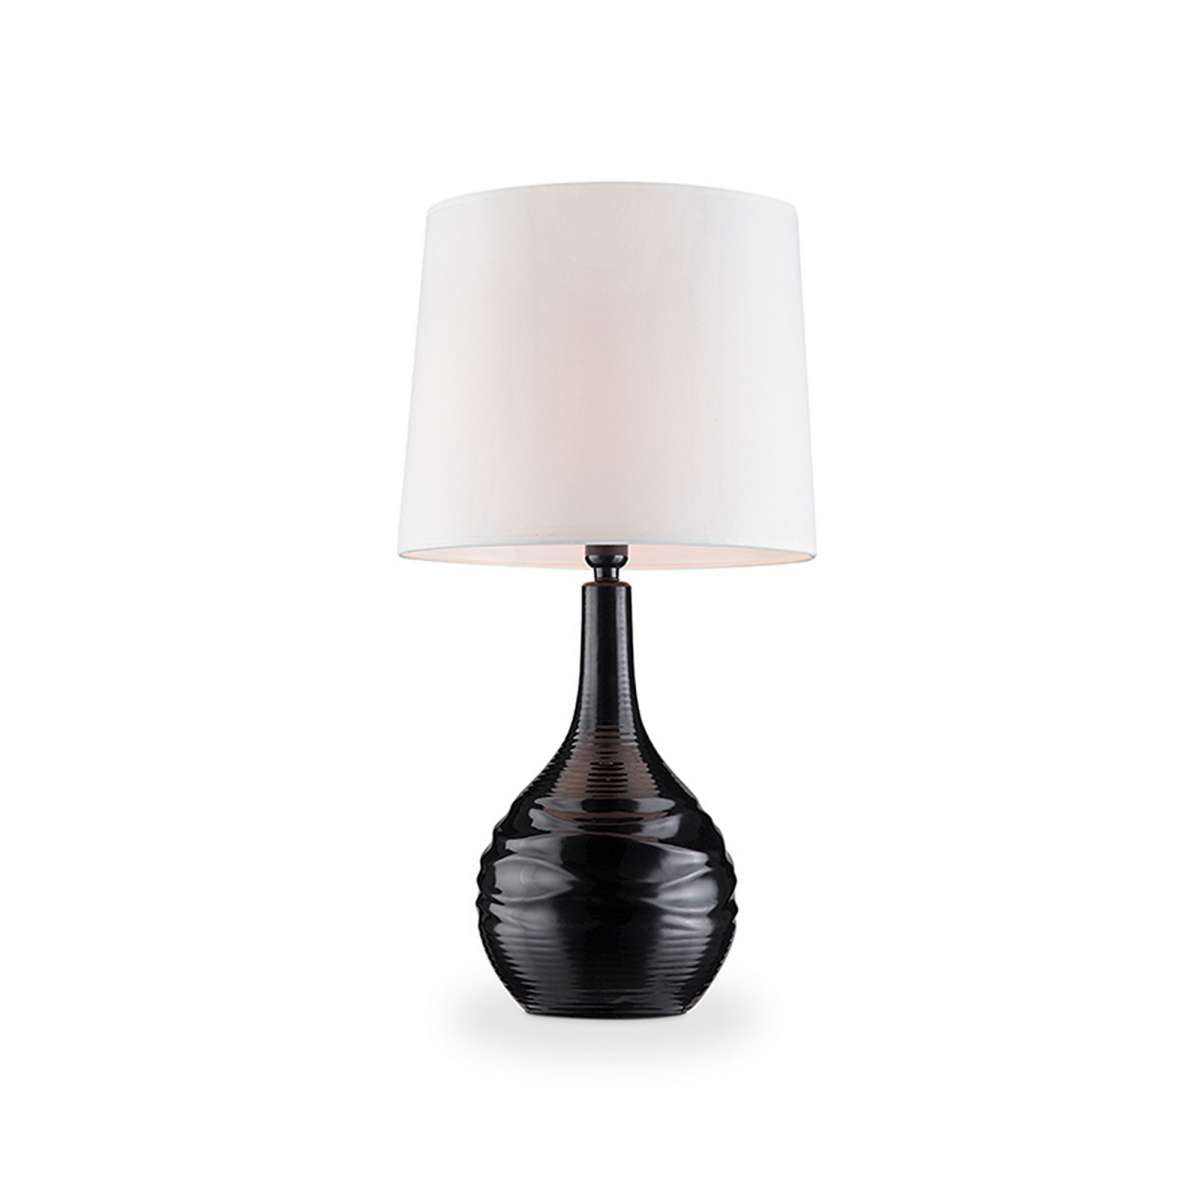 Table Lamp With Ribbed Ceramic Body, Black And White By Benzara